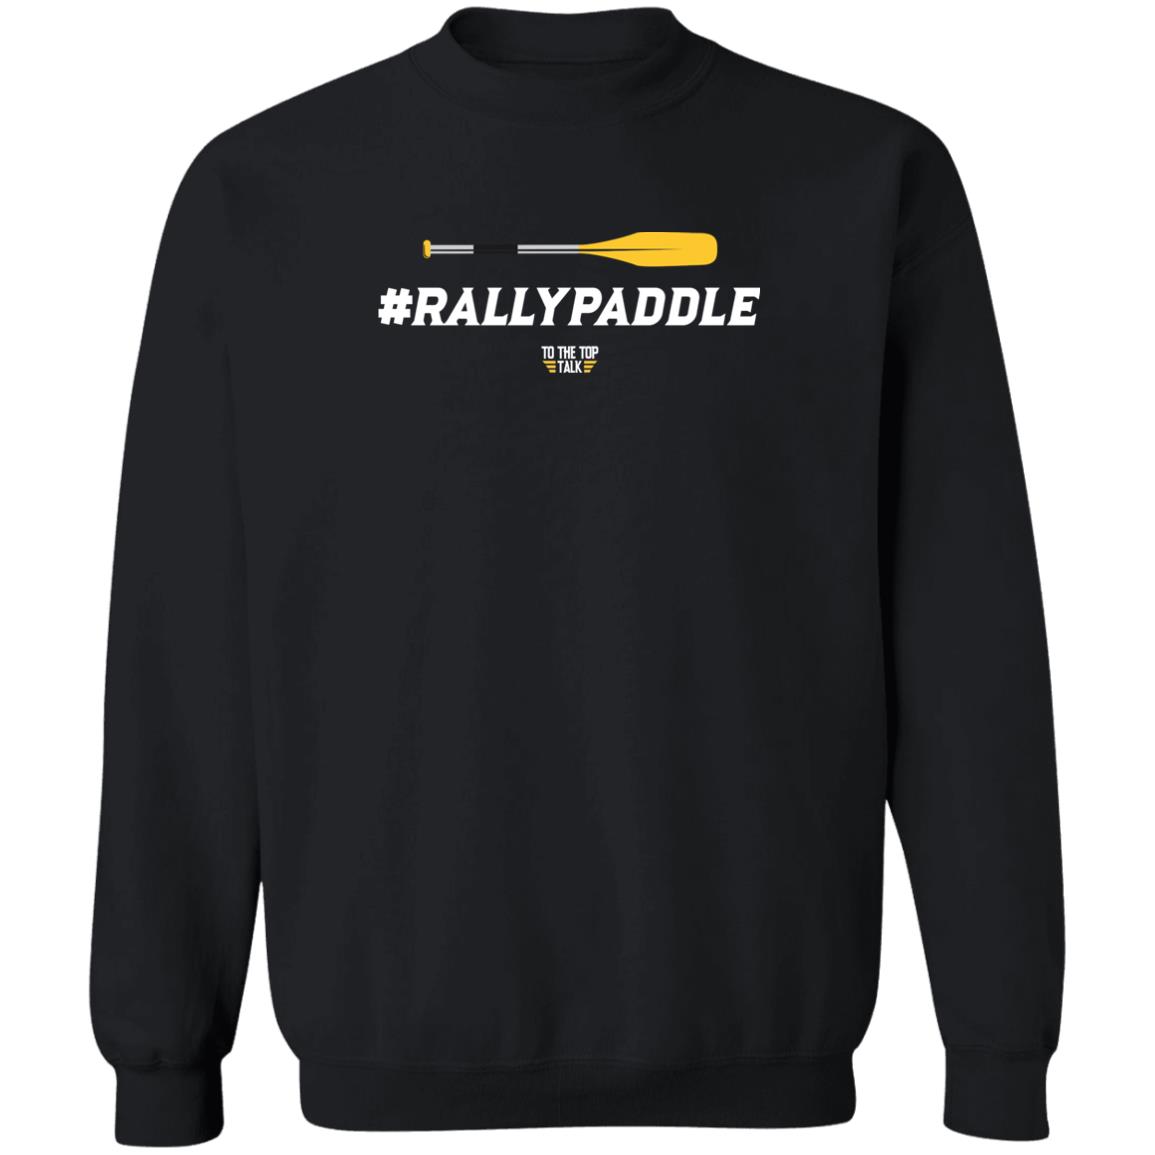 #Rallypaddle To The Top Talk Shirt 2